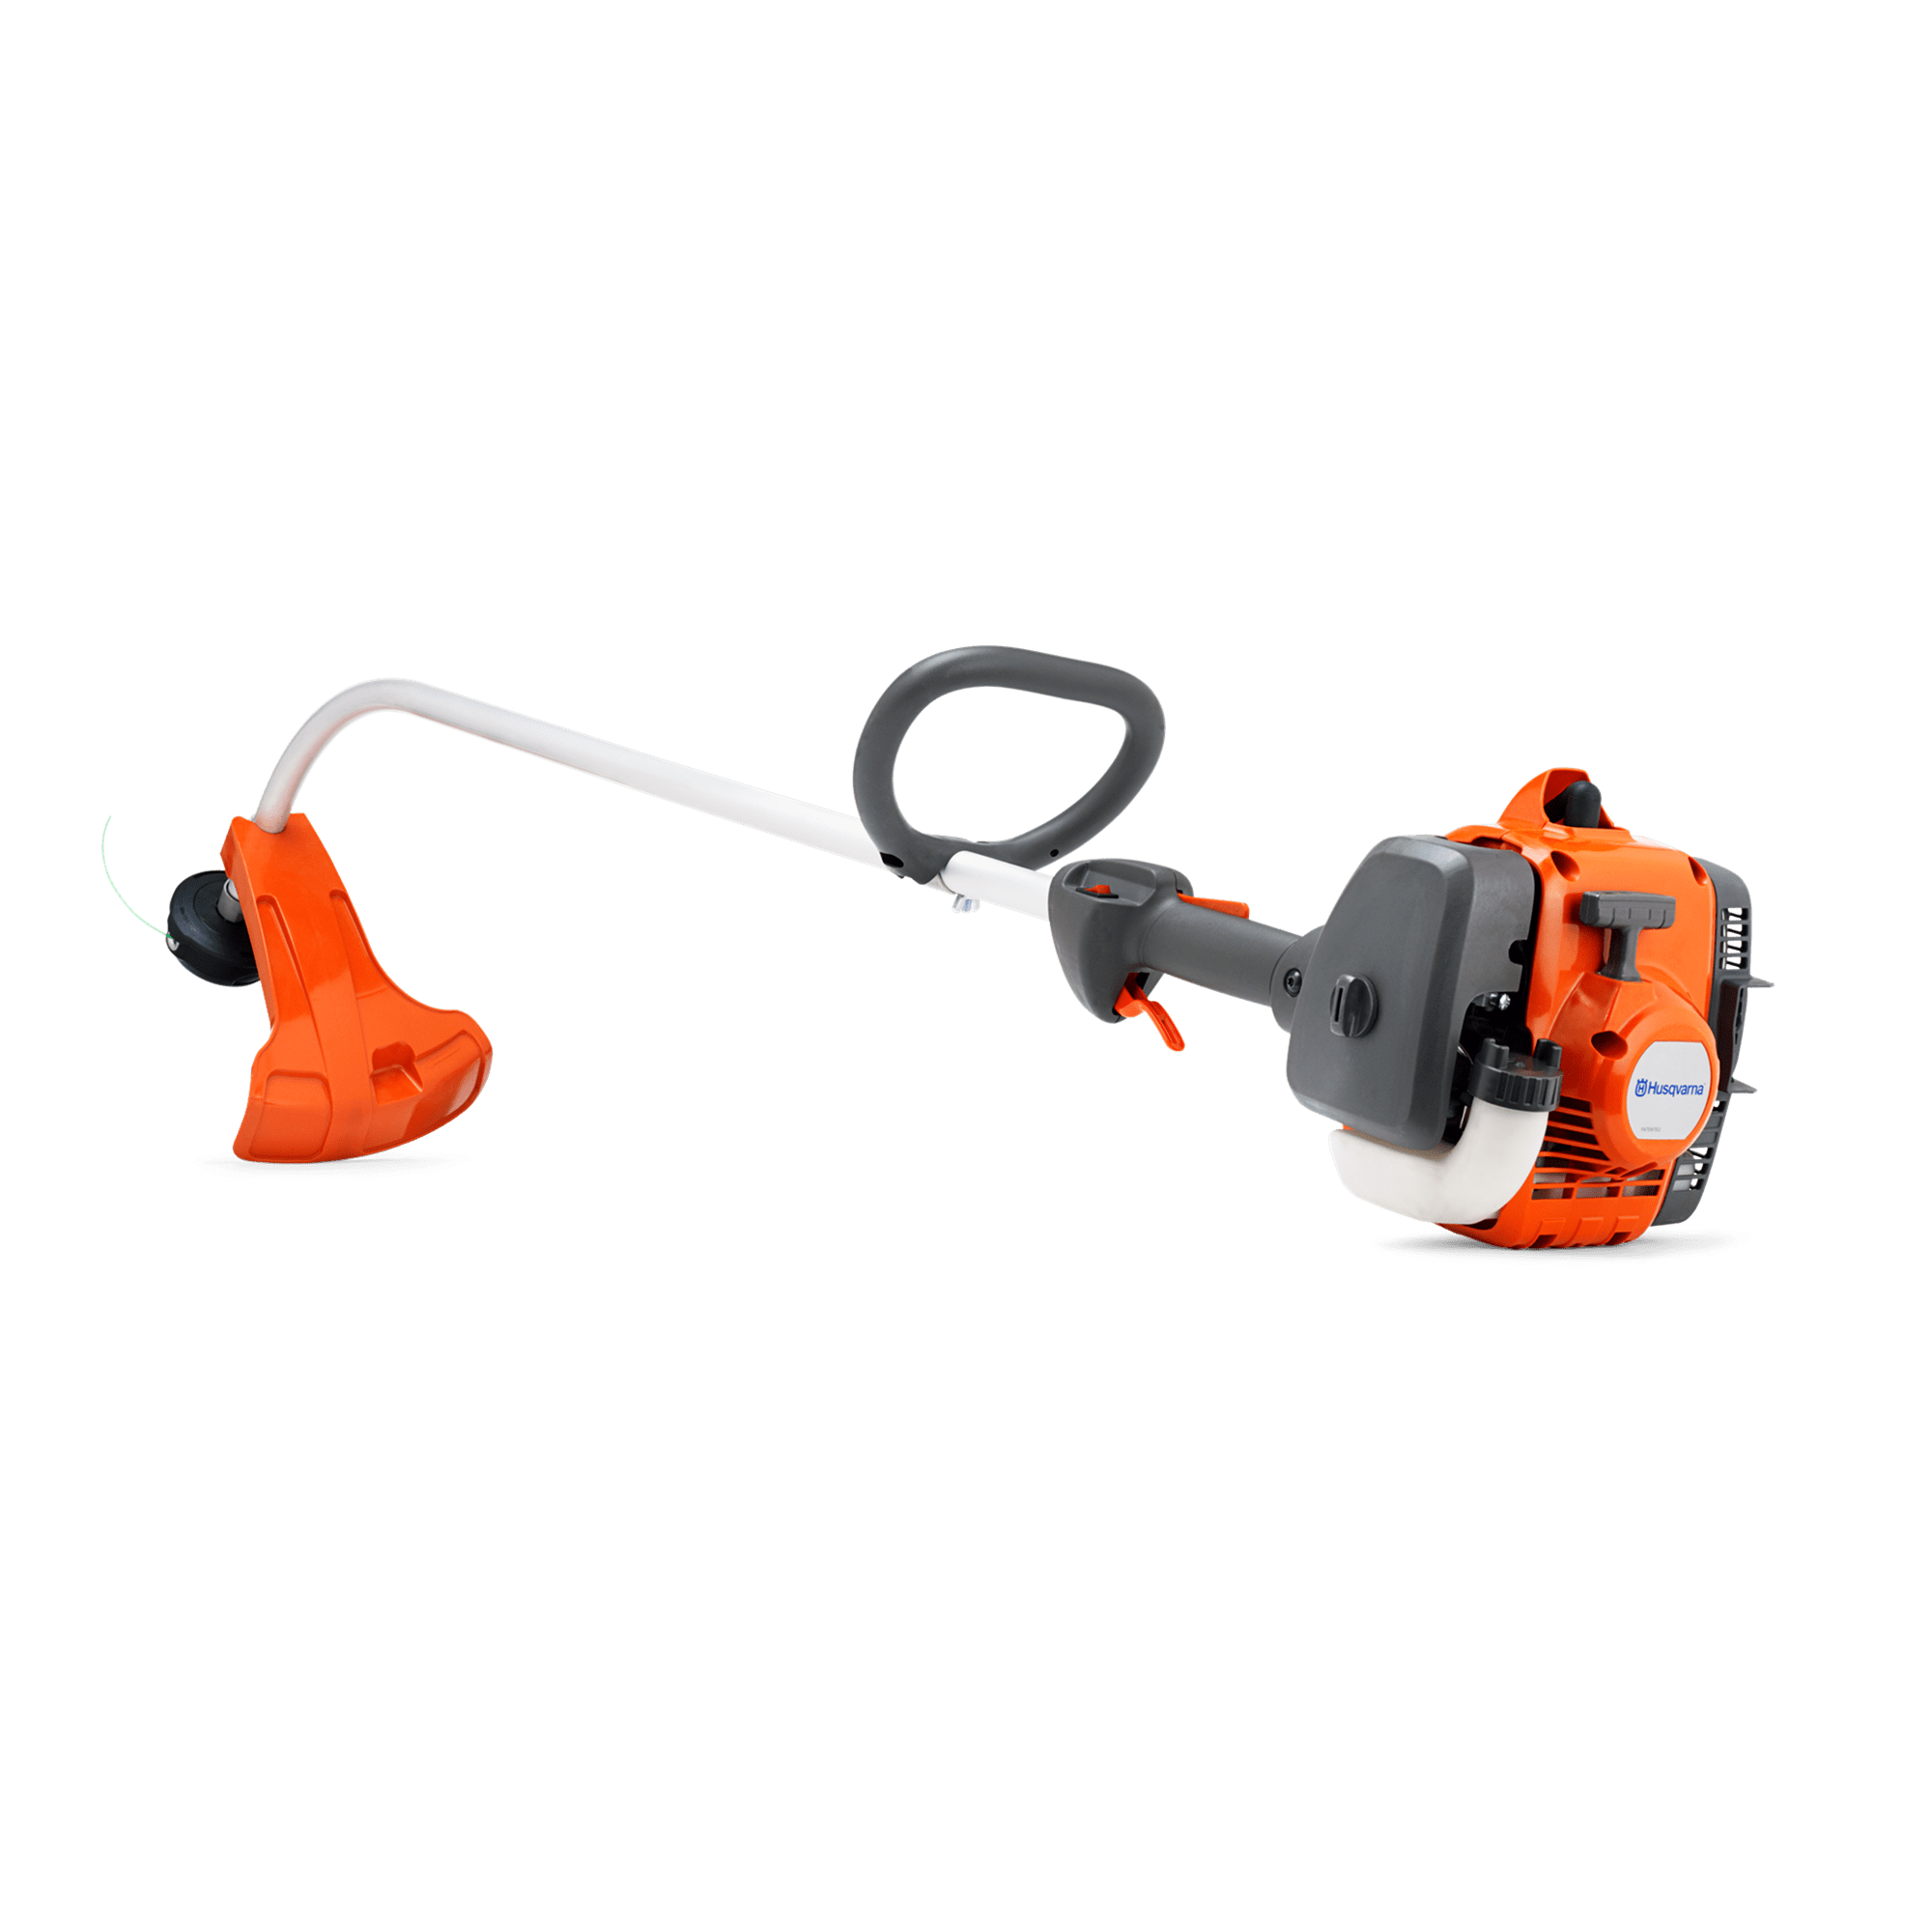 Image for 129C Gas Curved Shaft String Trimmer                                                                                             from HusqvarnaB2C